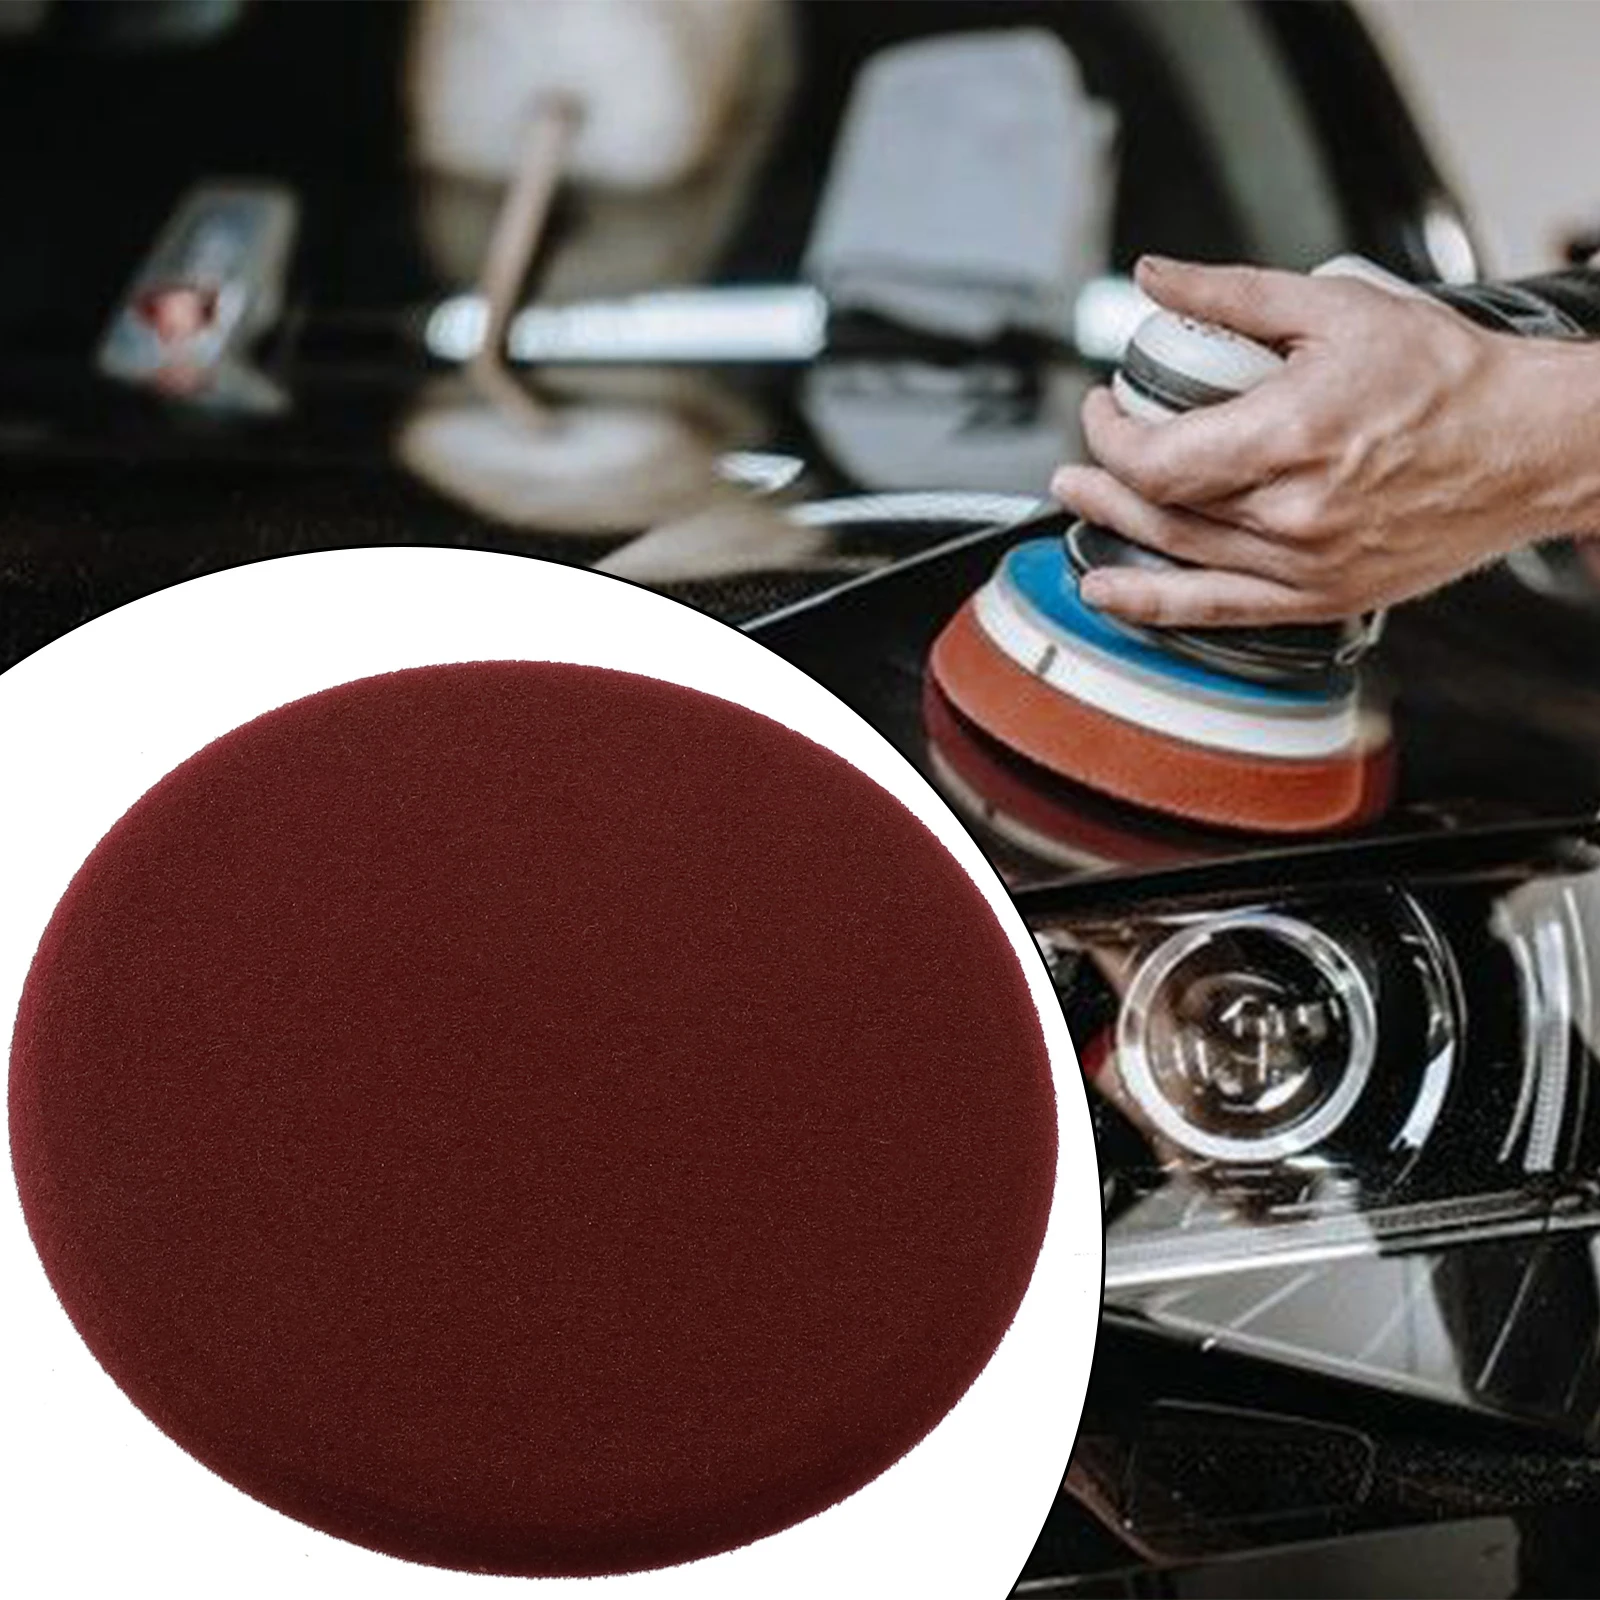 

1PCS Brand New Sponge Buffing Pad Grinding And Polishing Wheel For Car Waxing Polishing Suitable For Heavy Scratches 5.5 Inches